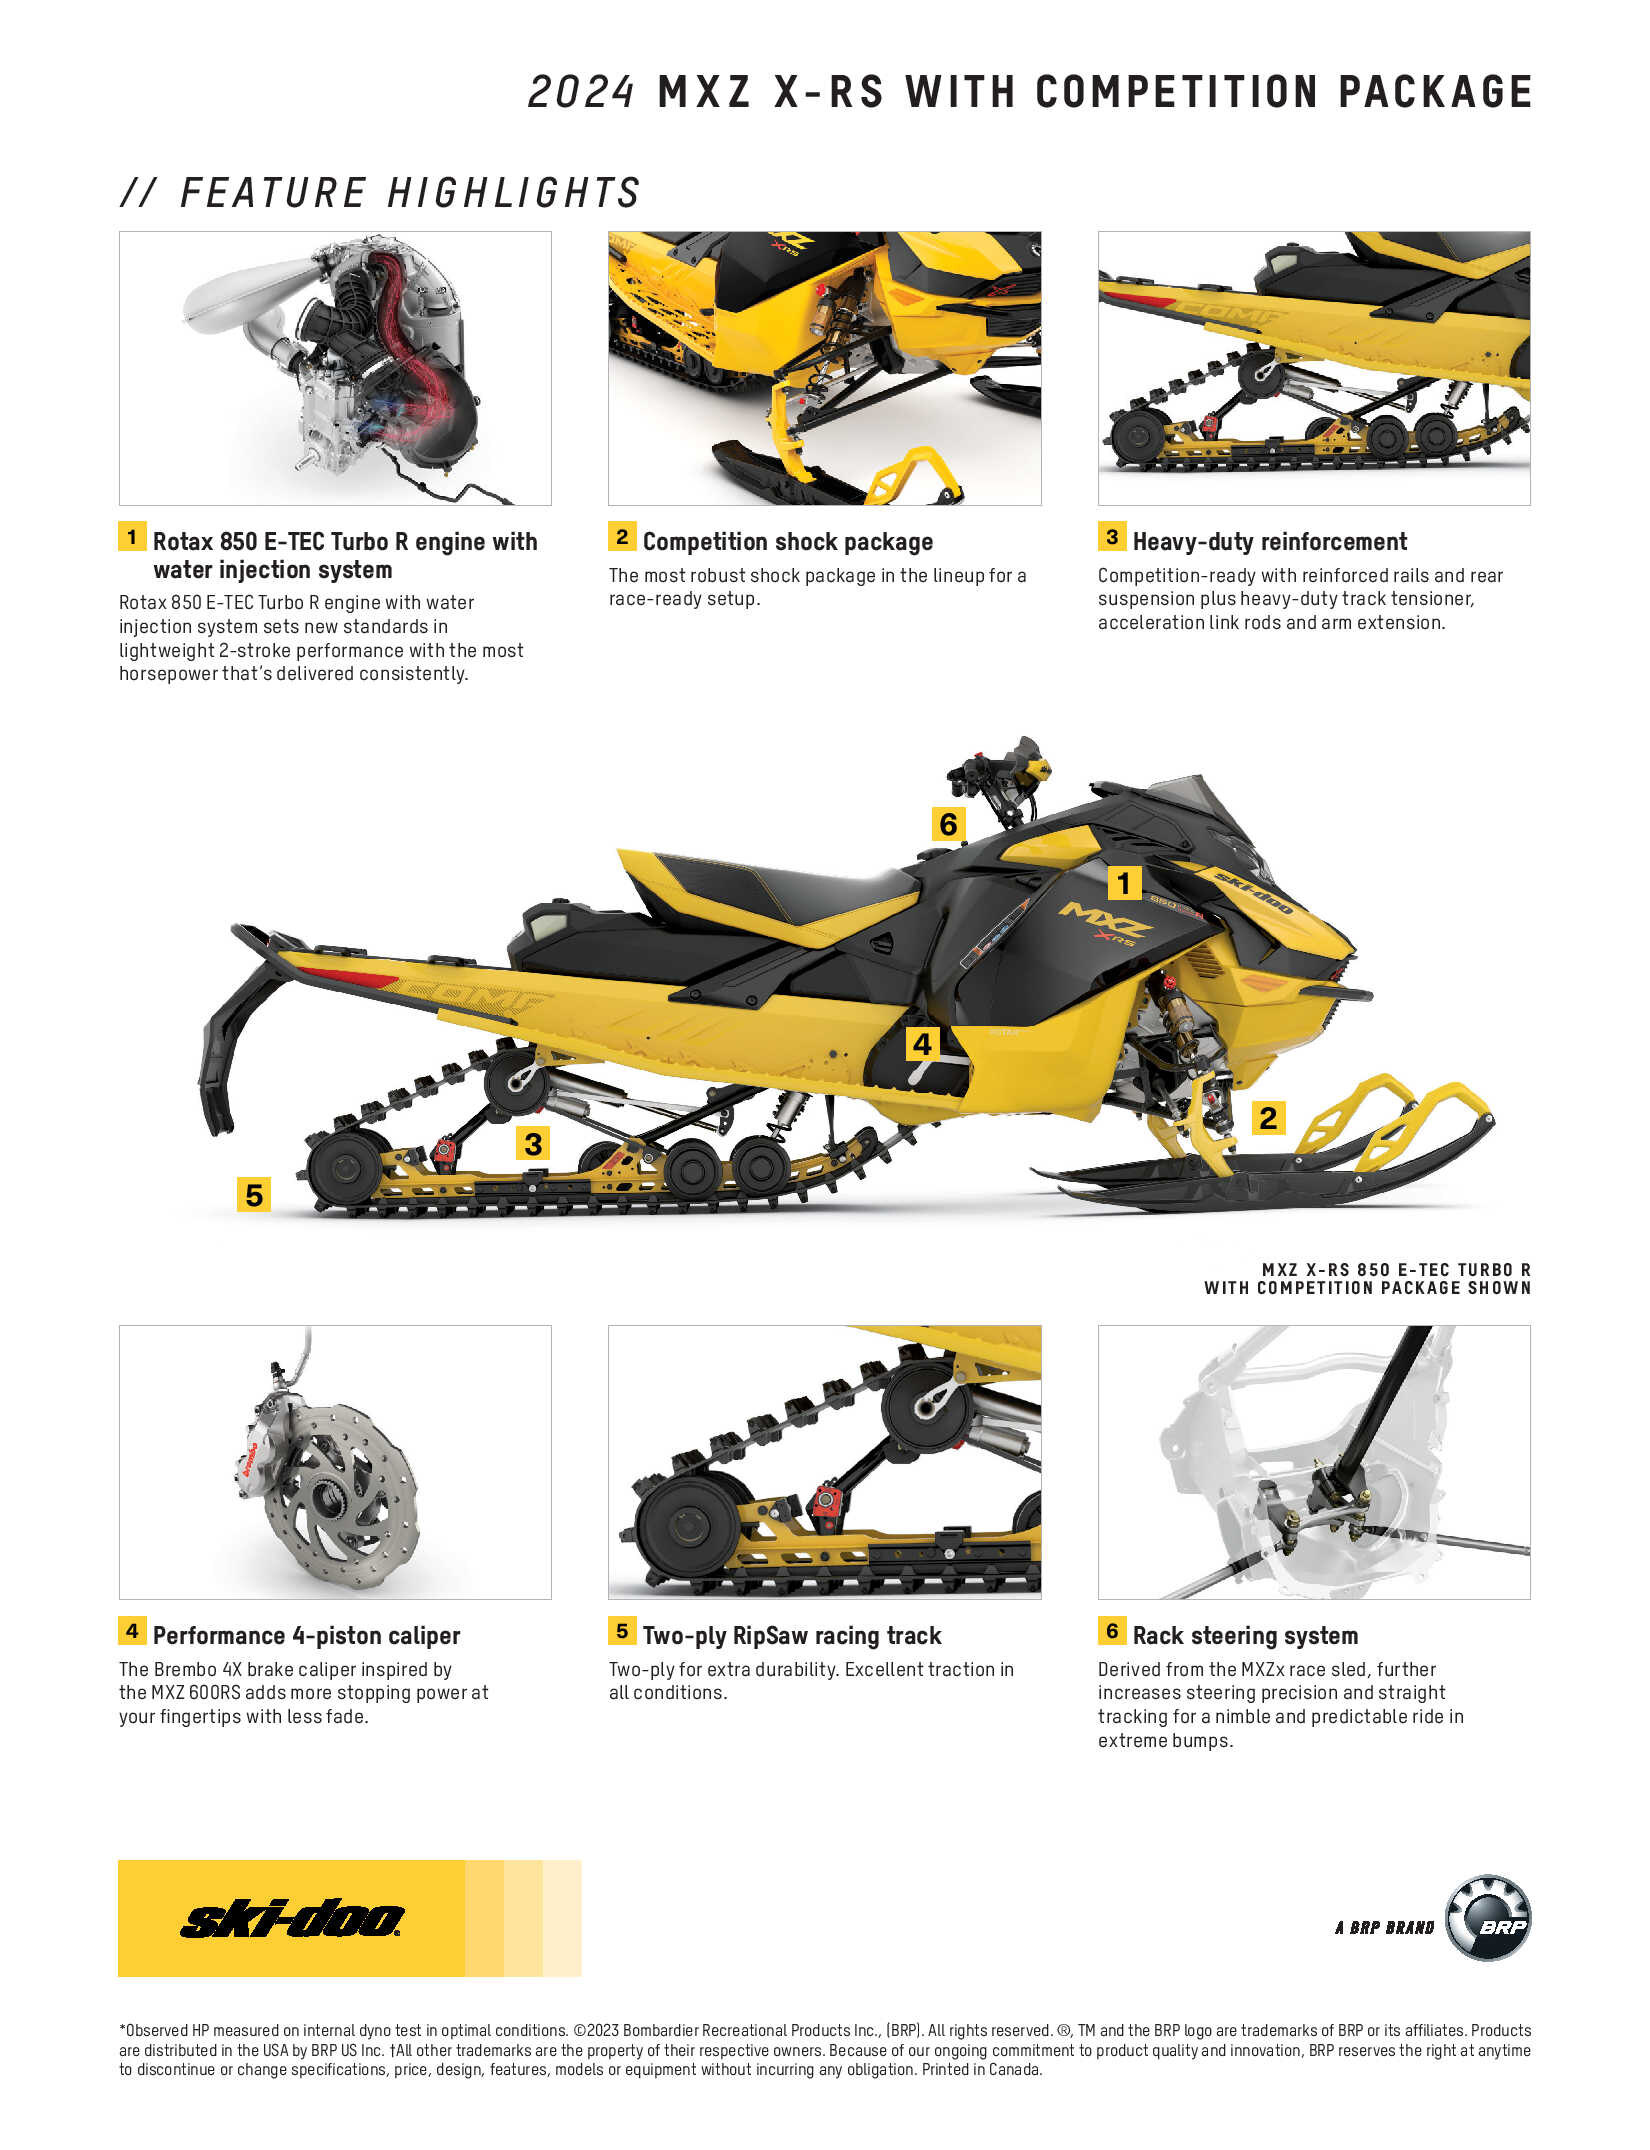 2024 Ski-Doo MXZ X-RS Competition Package specs 2